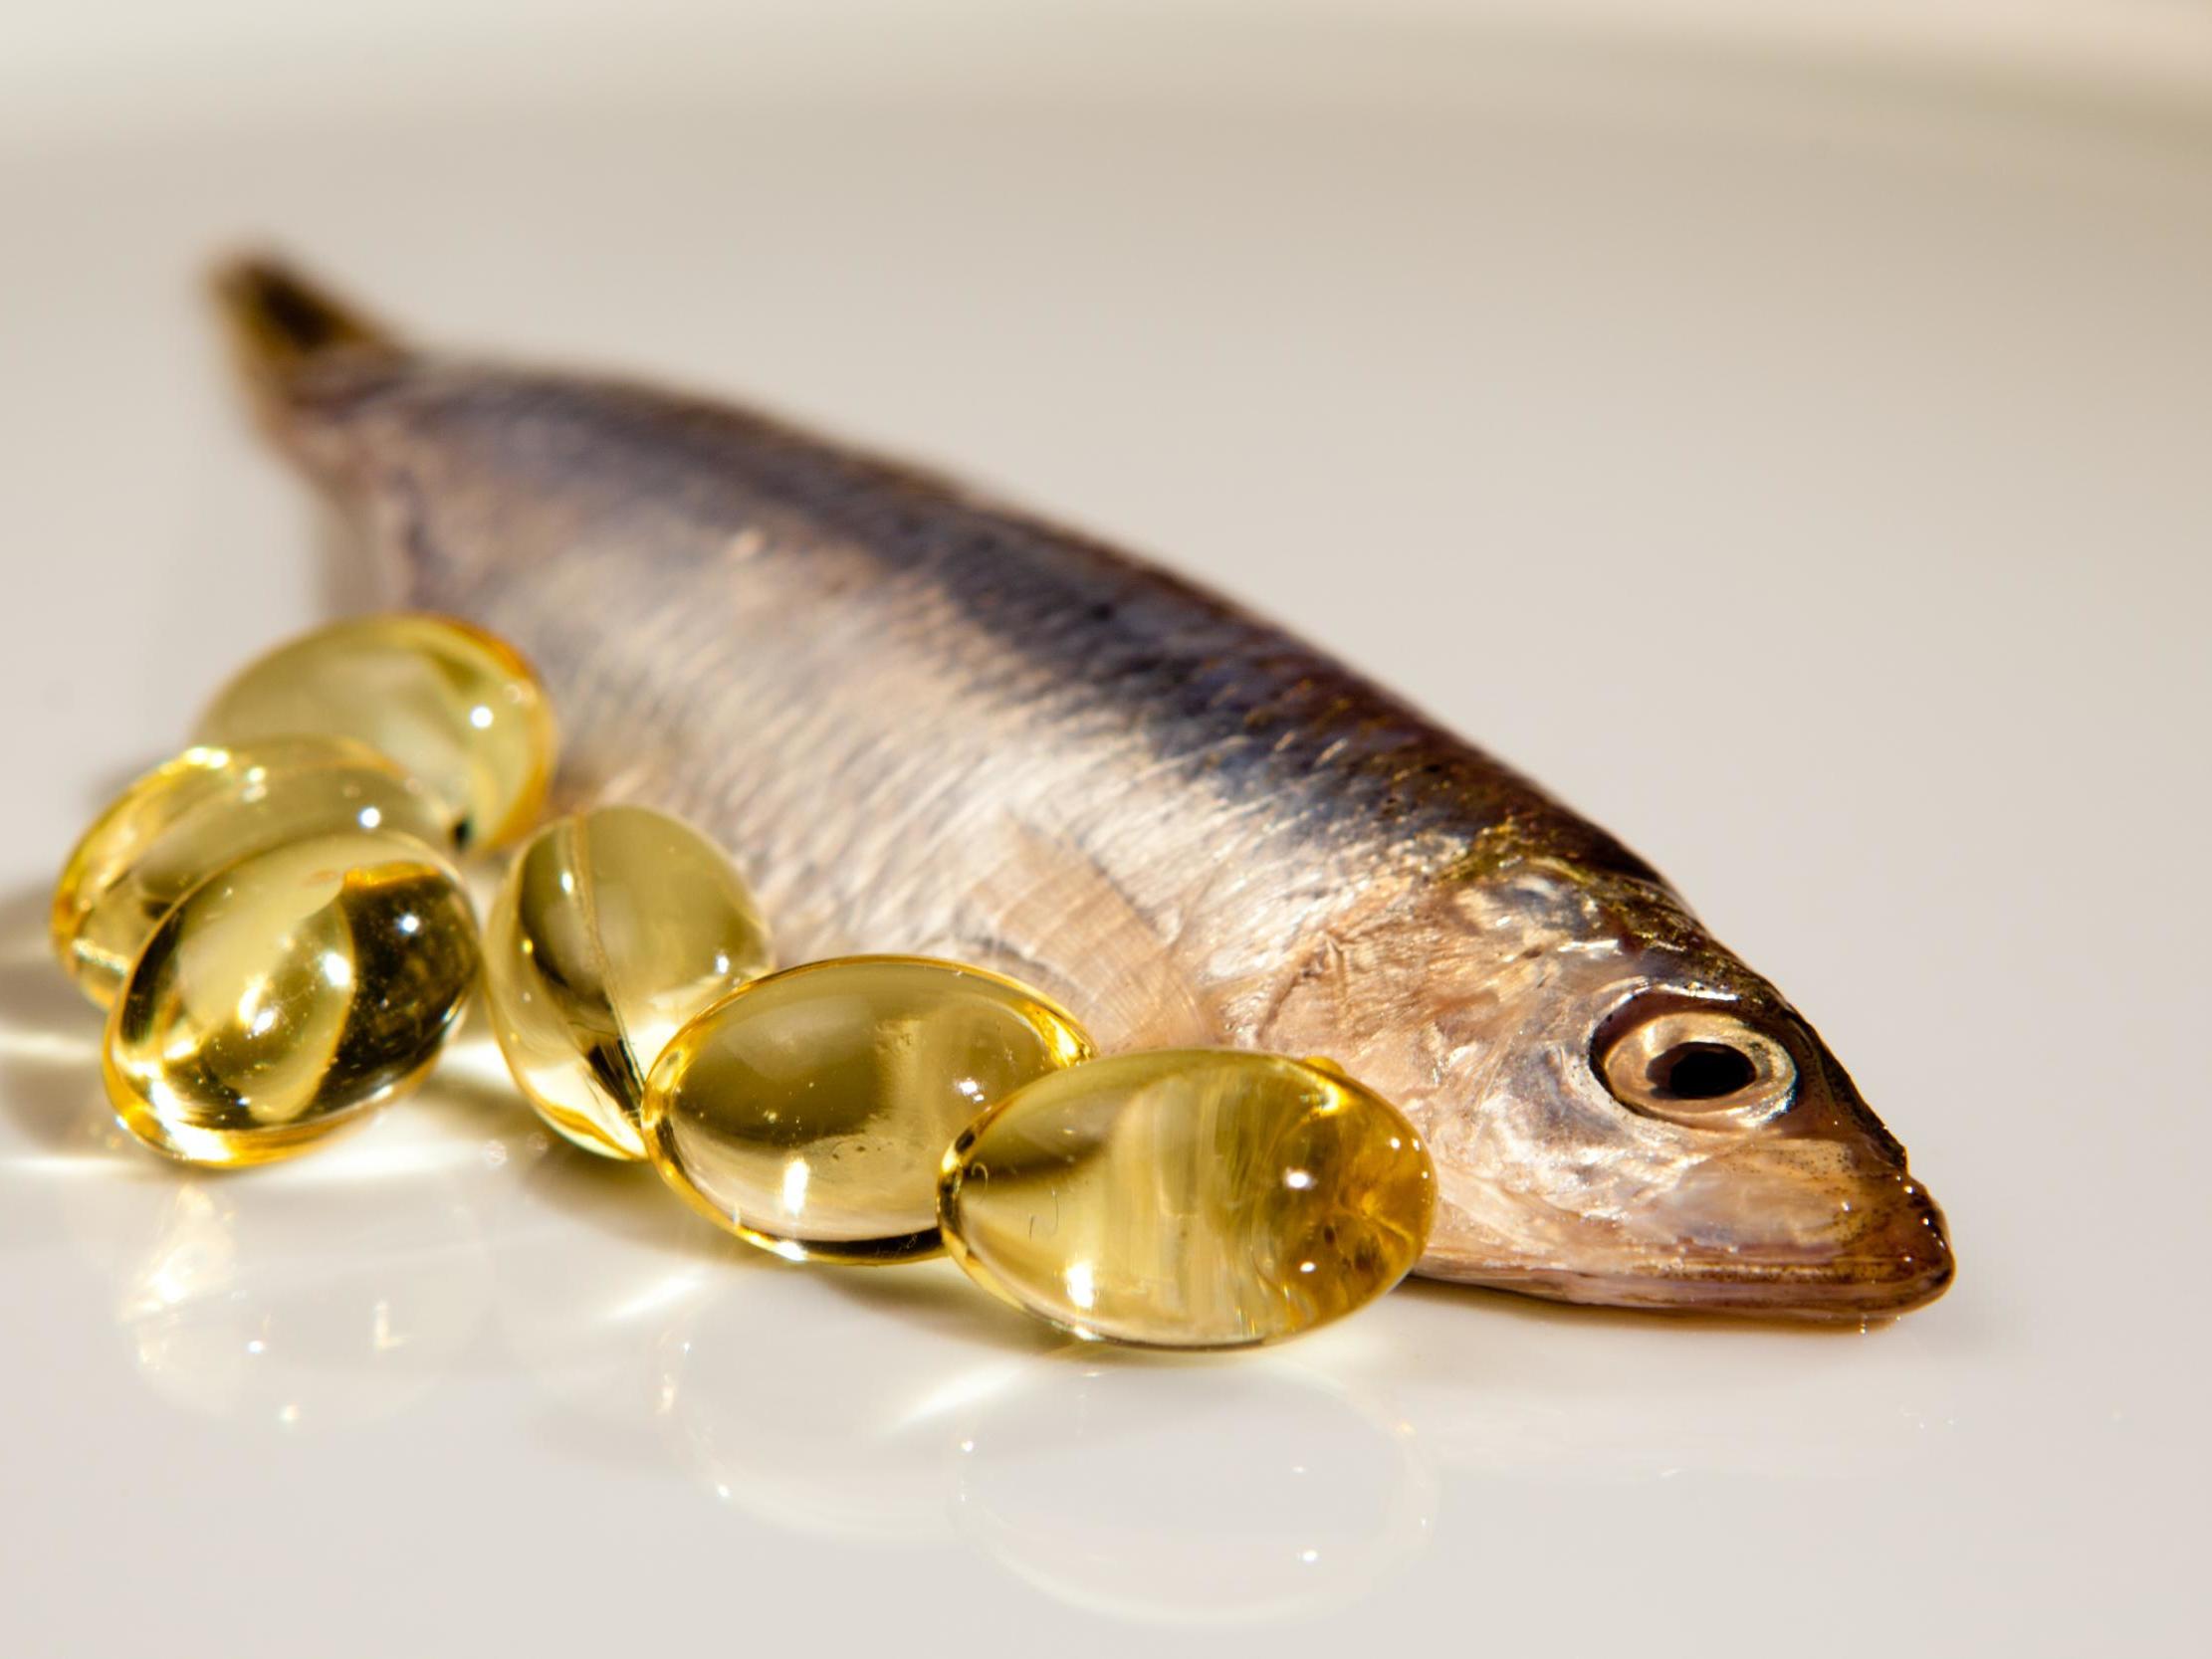 For those already consuming a healthy diet, the benefits of taking additional fish oil supplements are not proven